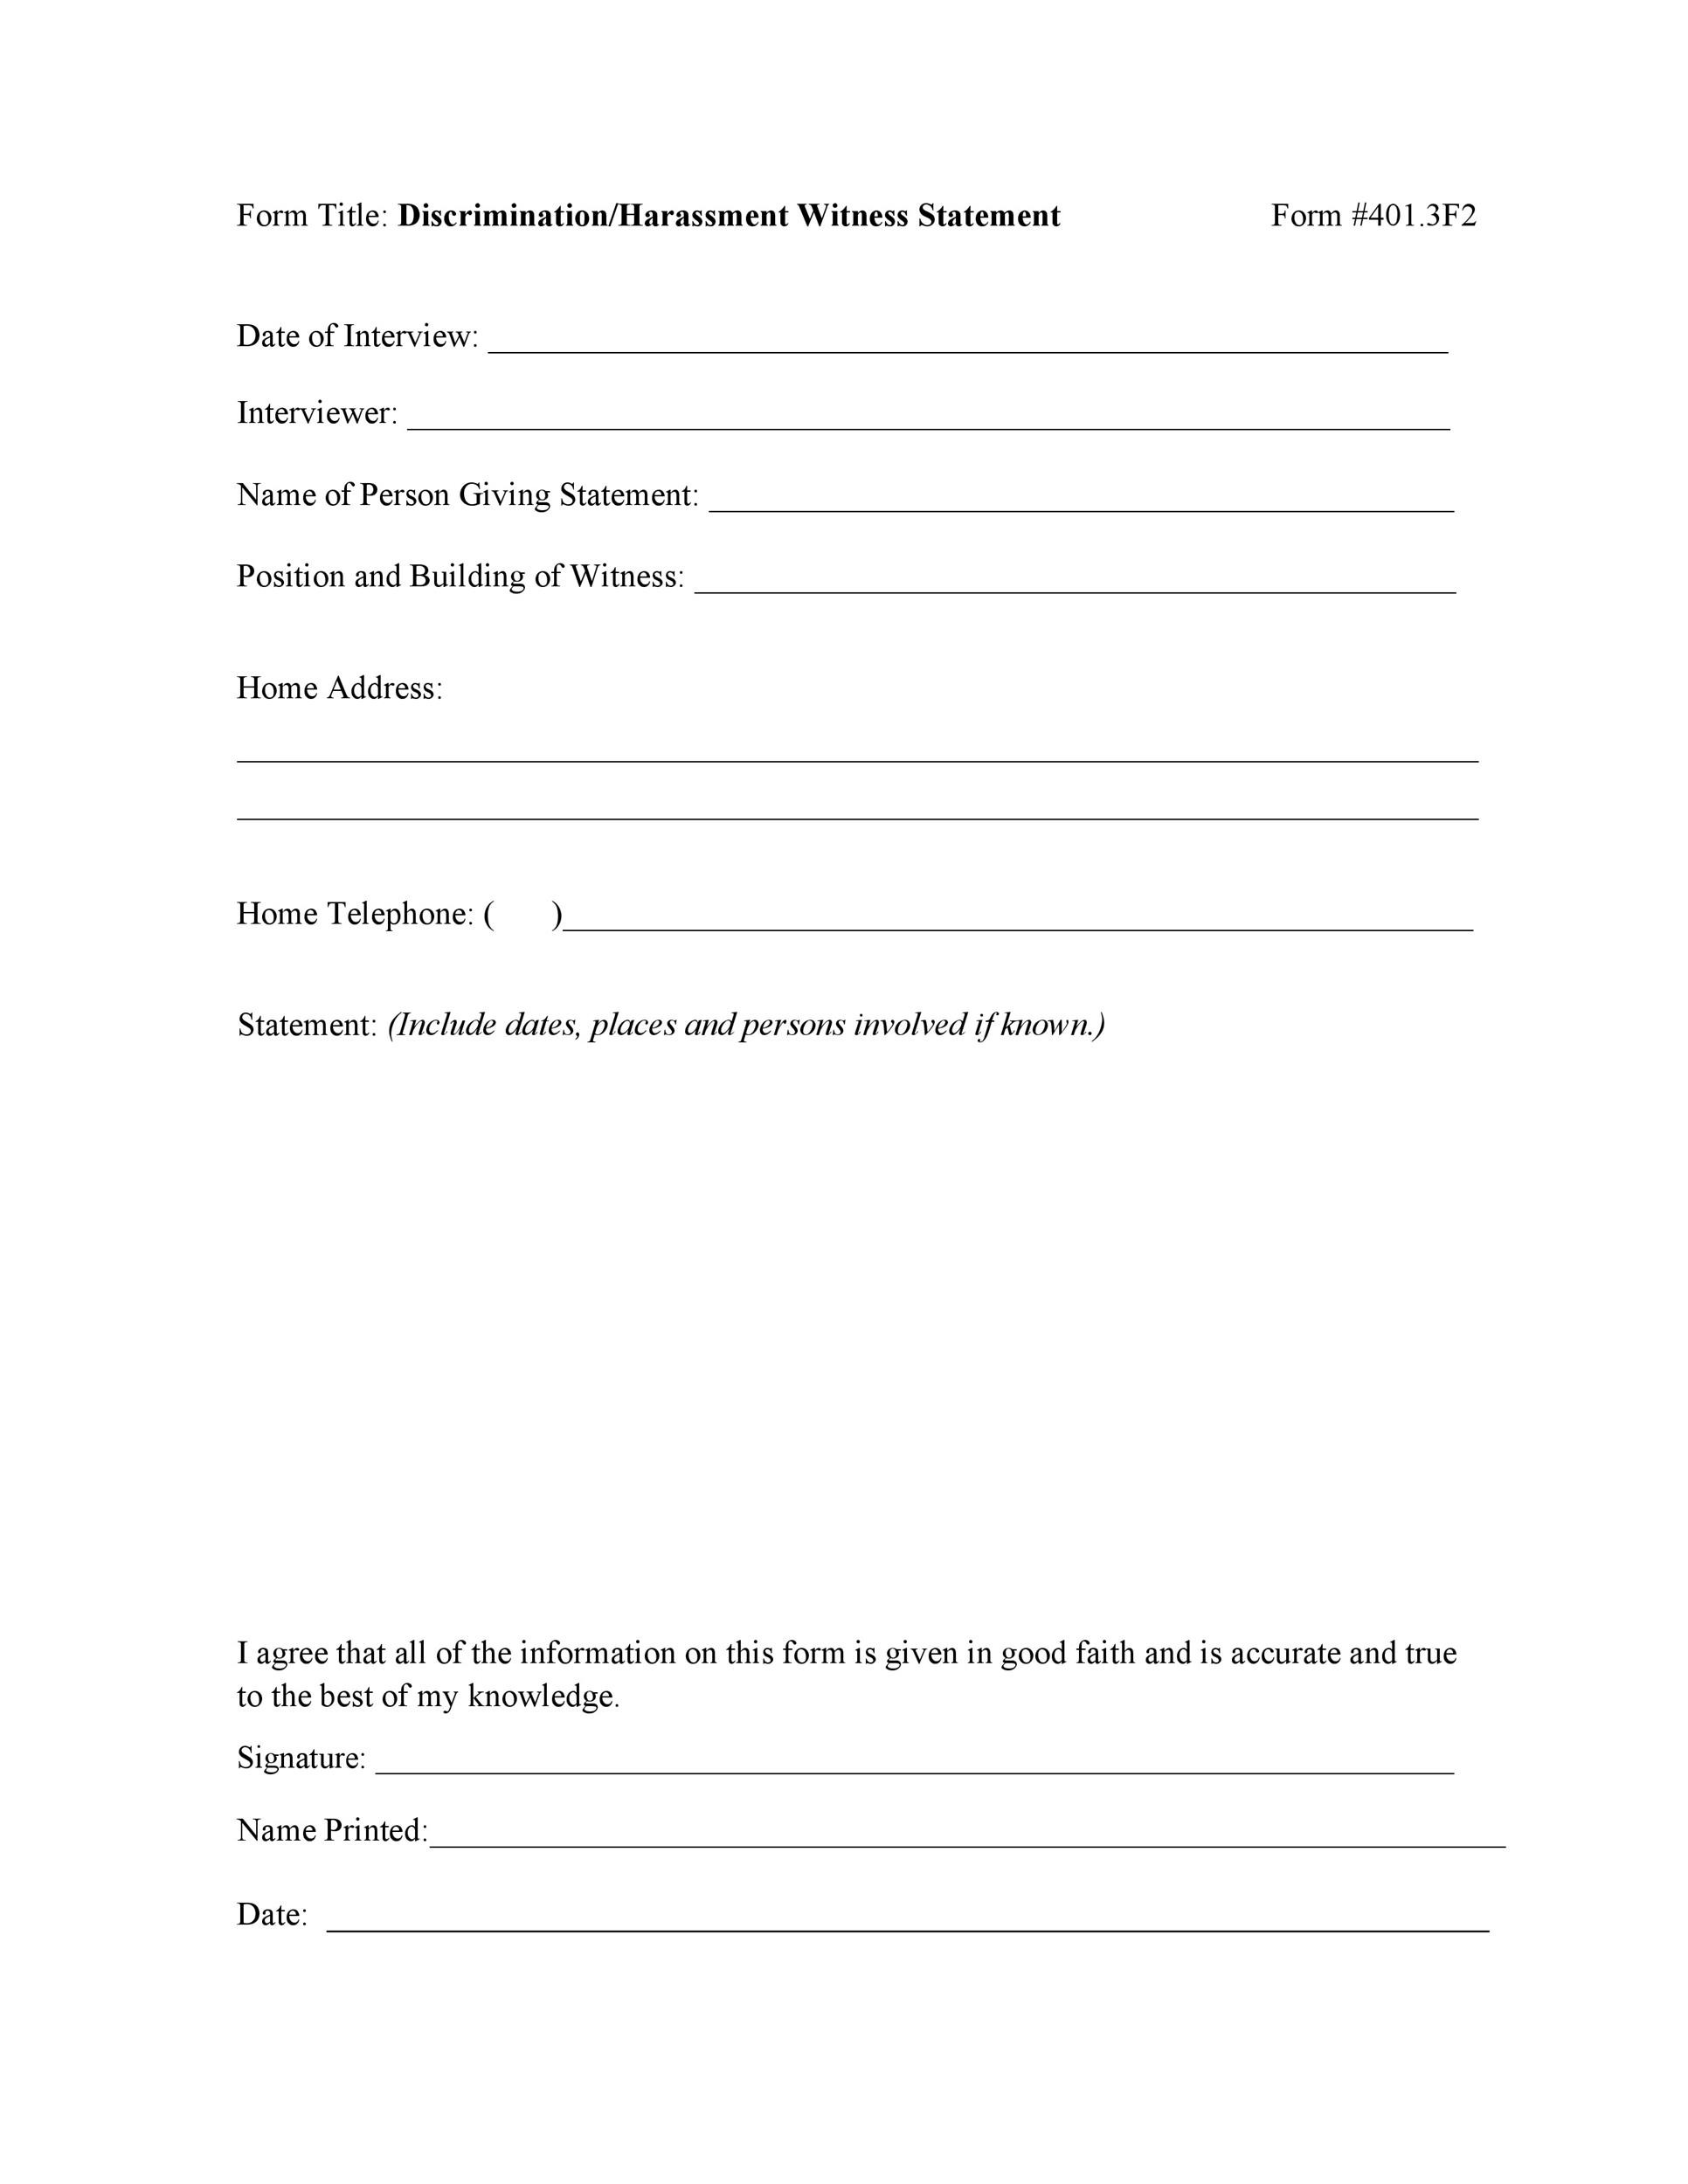 50 Professional Witness Statement Forms & Templates ᐅ TemplateLab